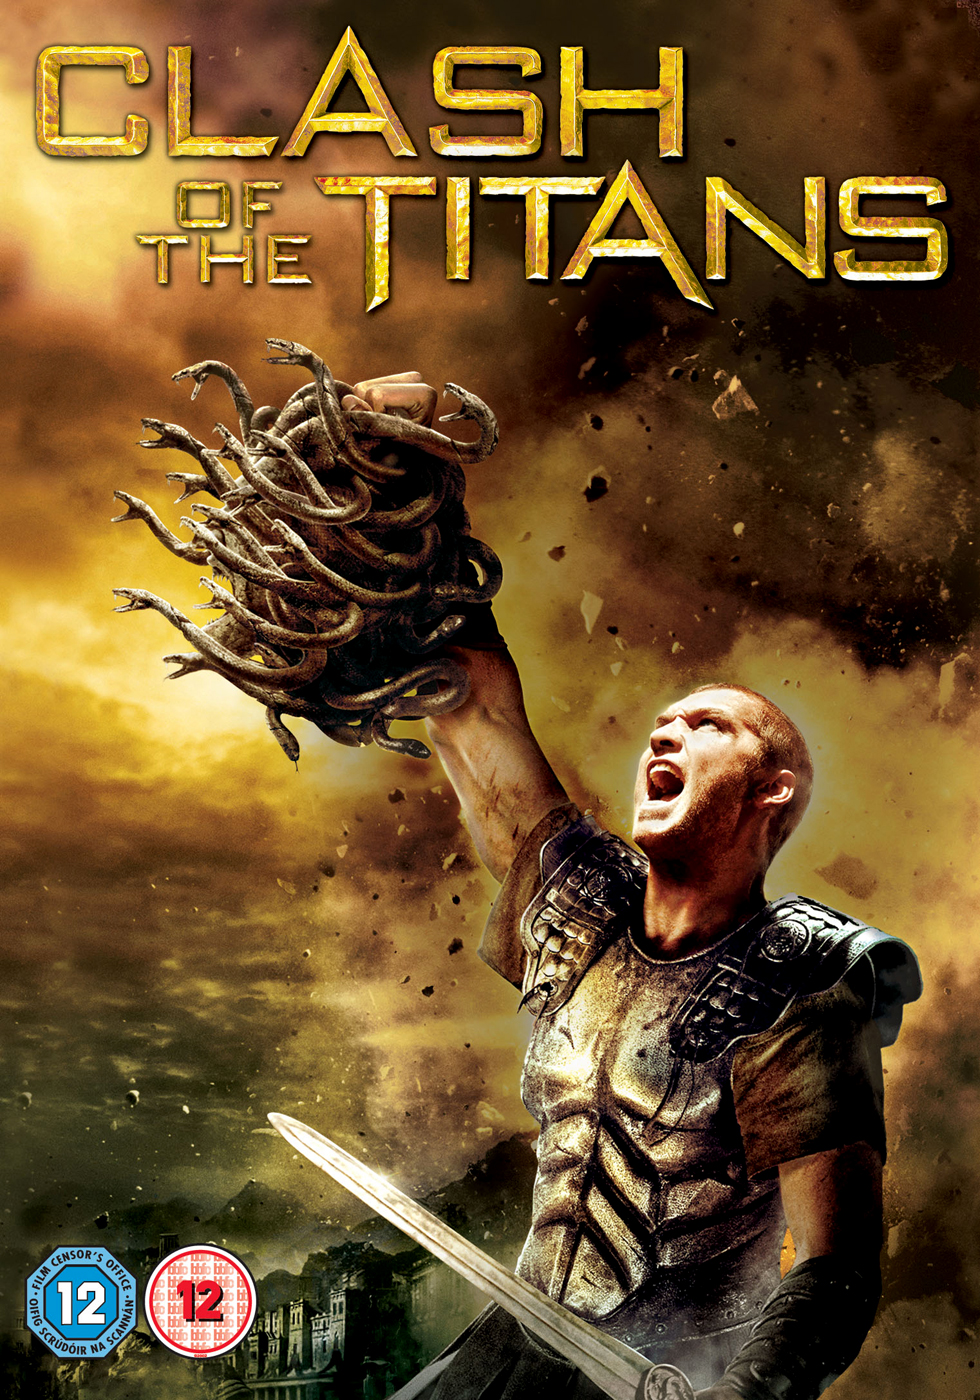 Wrath of The Titans 3d 2d Blu-ray Region for sale online